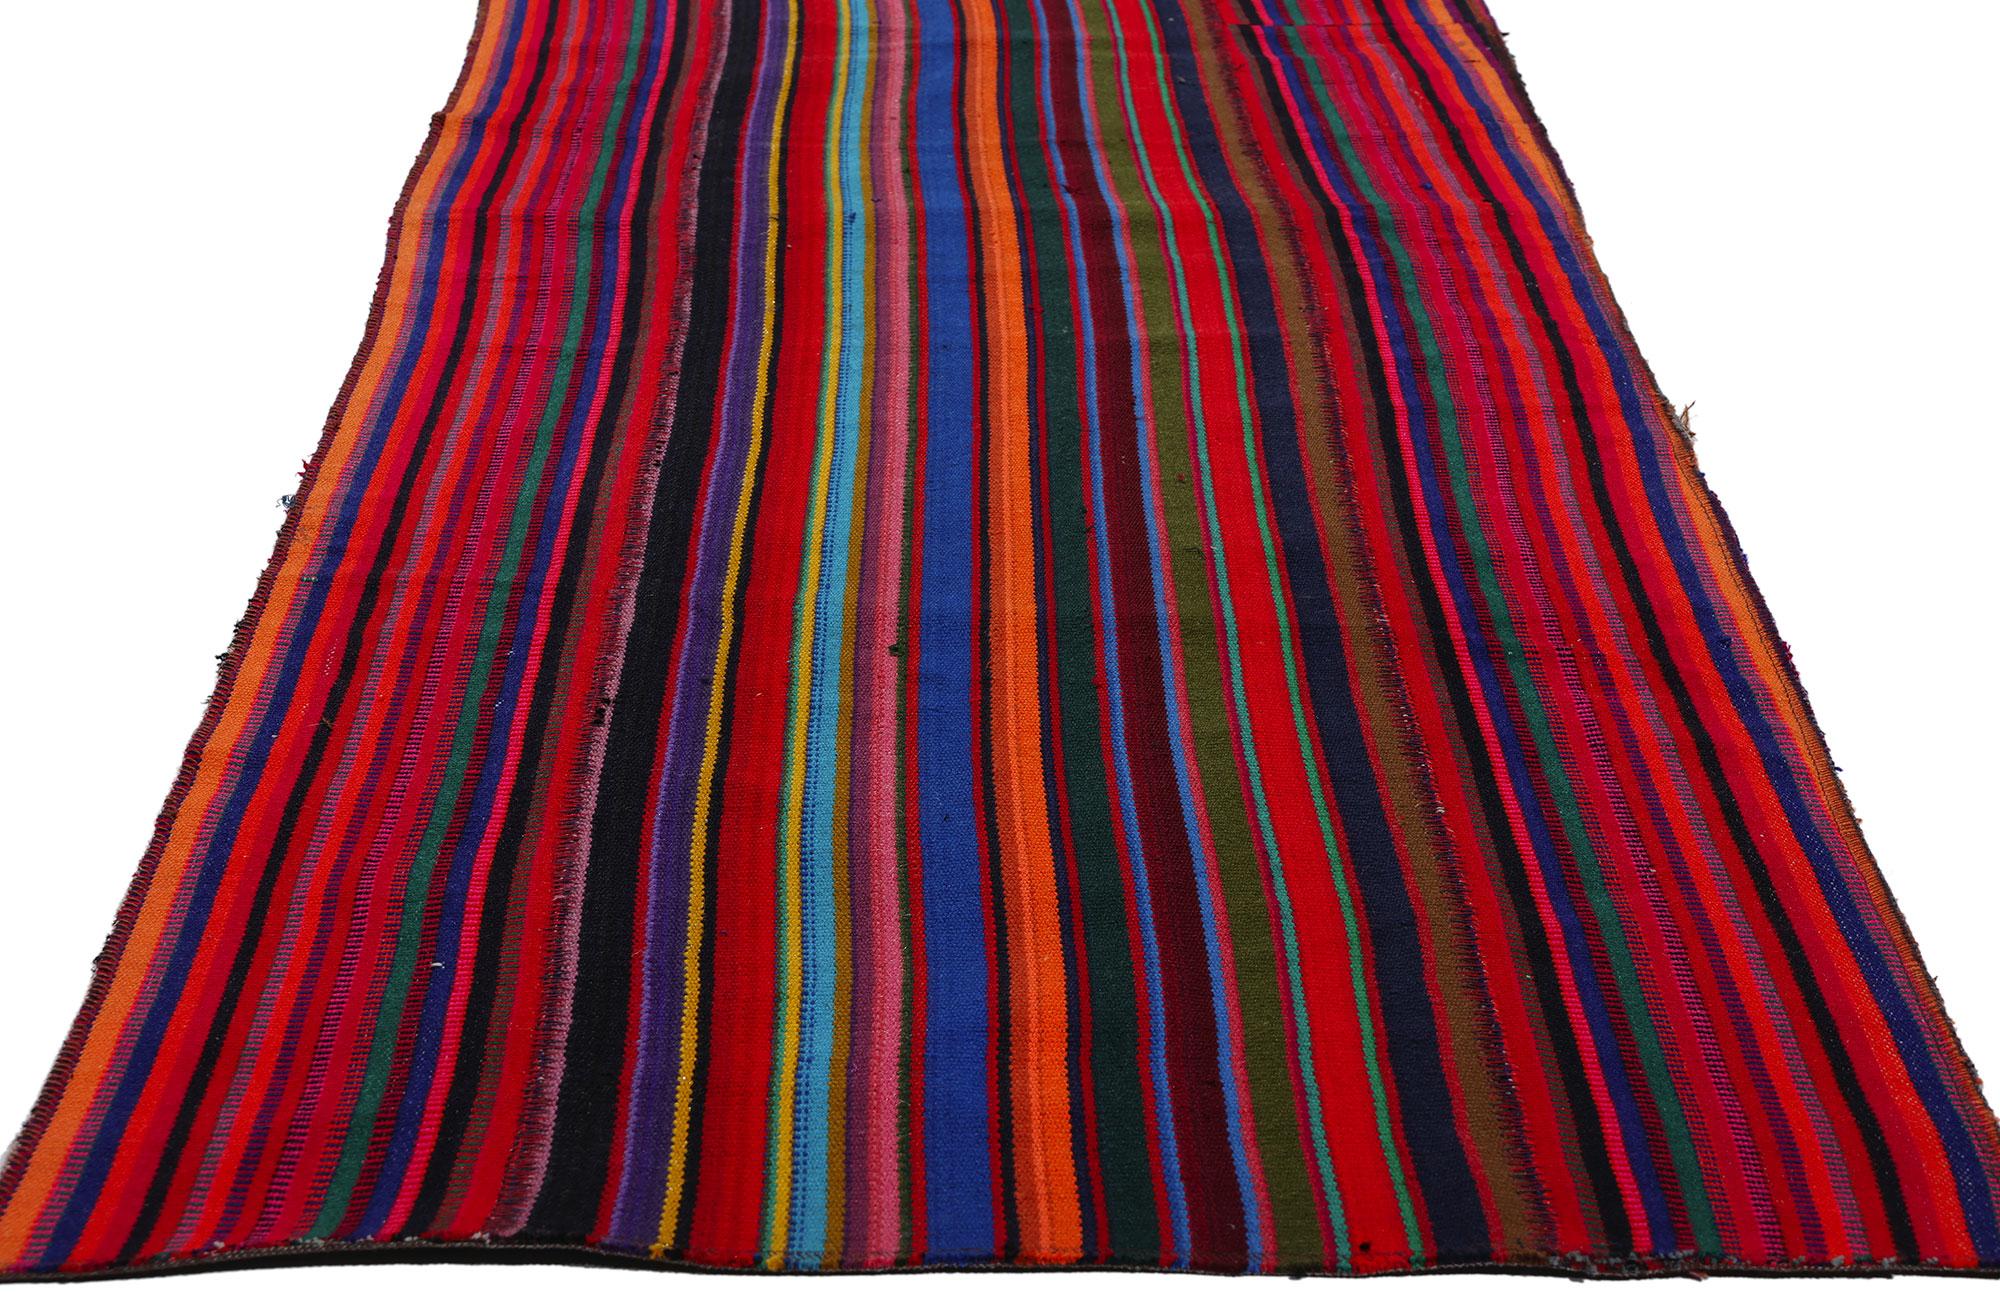 78741 Vintage Turkish Striped Kilim Rug Runner, 02'04 x 12'07. The nomadic Shahsevan people are credited as the originators of the Jajim handicraft, a thicker textile akin to a blanket, traditionally utilized as a means for packing belongings during